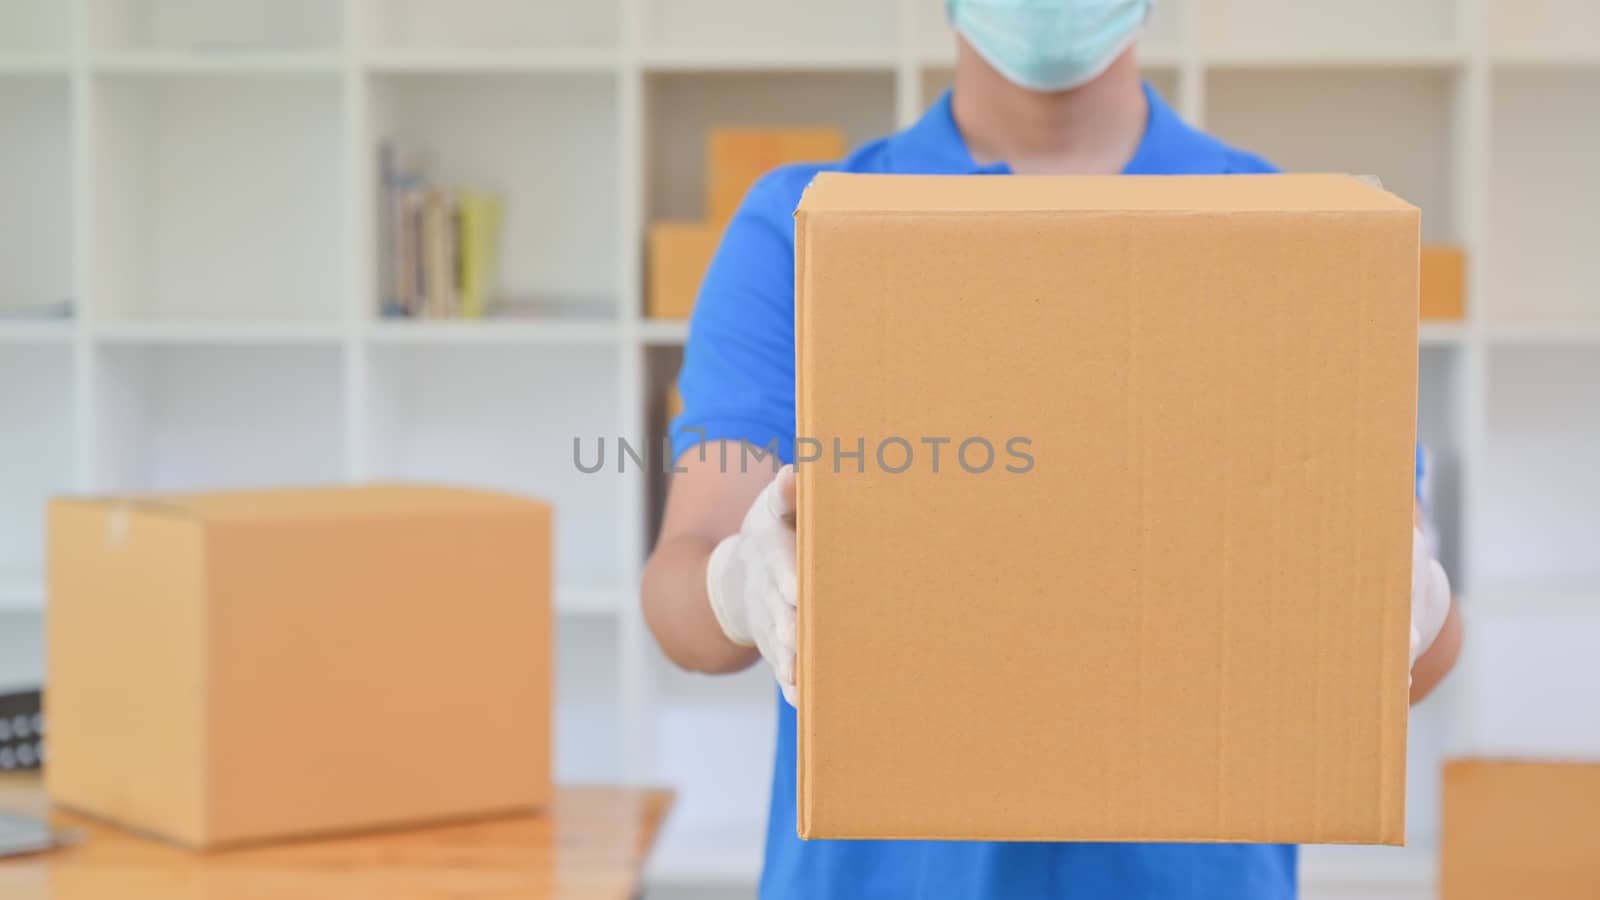 The delivery staff held a brown paper box. He was wearing gloves and a mask.